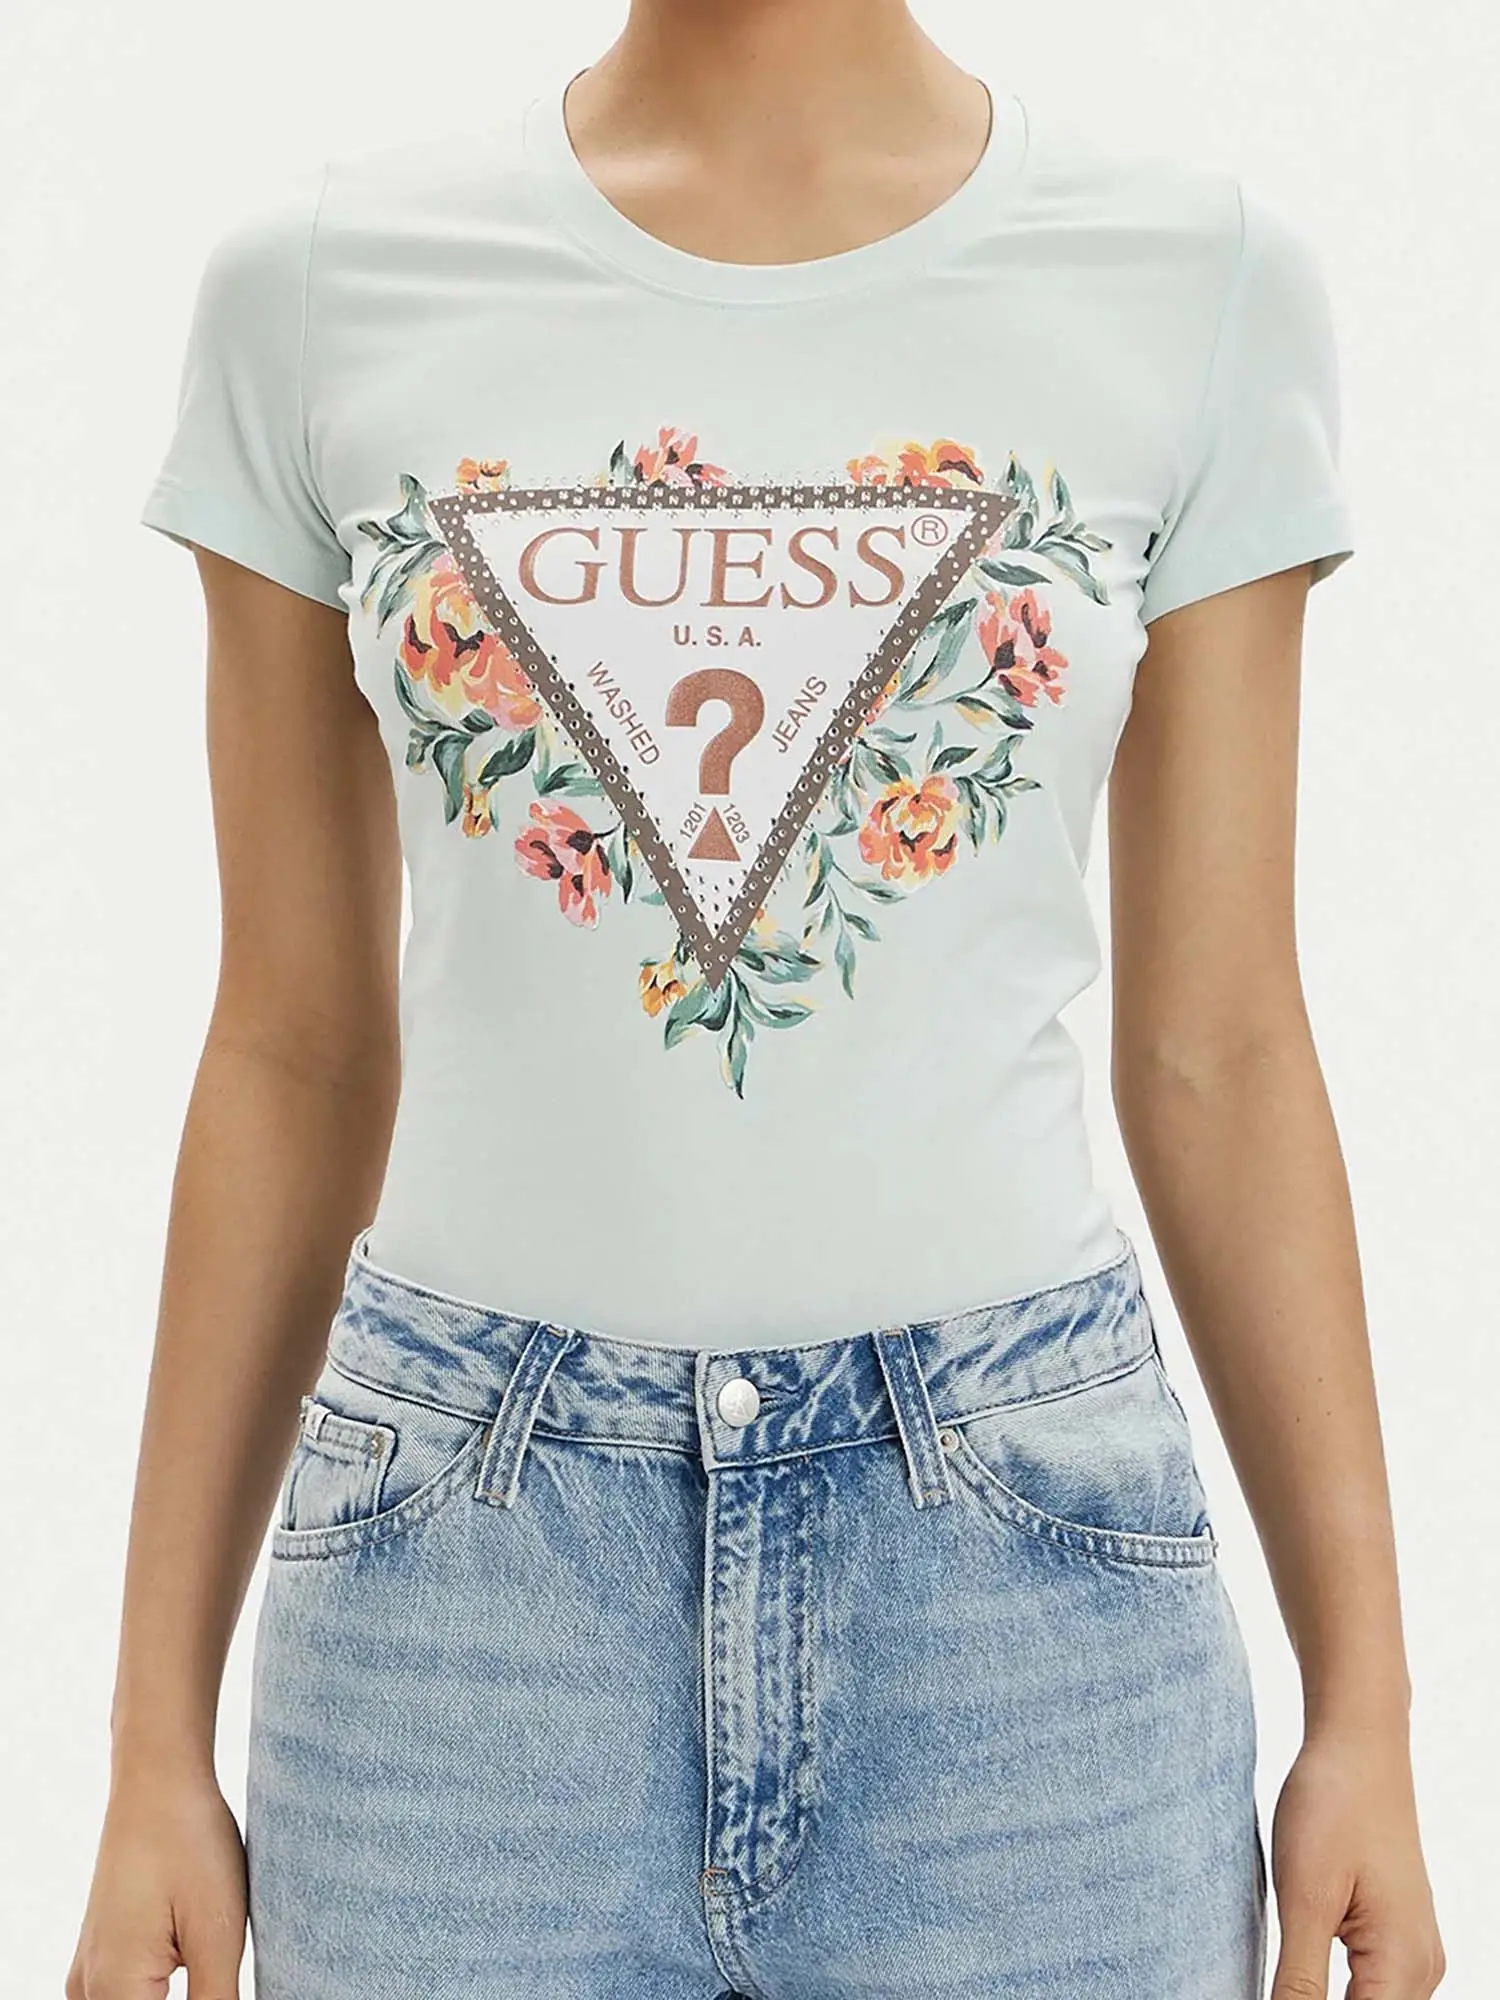 T-SHIRT DONNA - GUESS JEANS - W4GI24 J1314 - VERDE, S